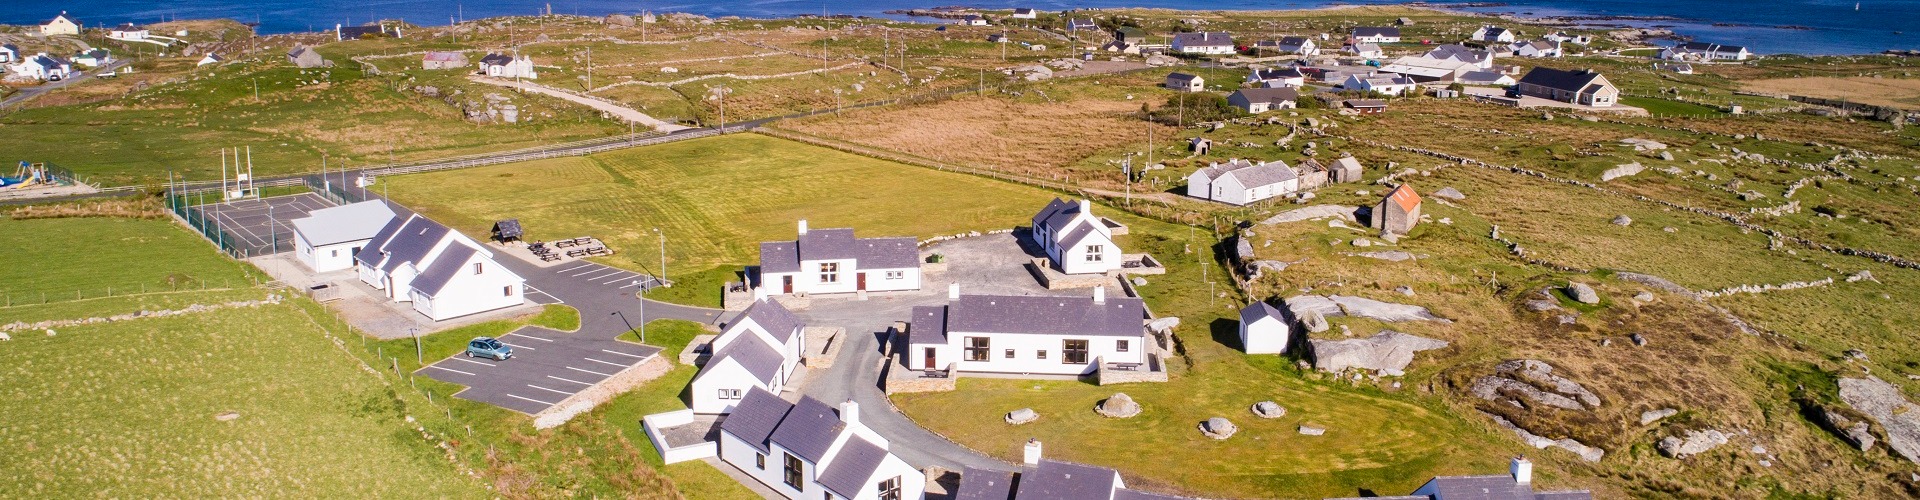 Arranmore Holiday Village Aerial View